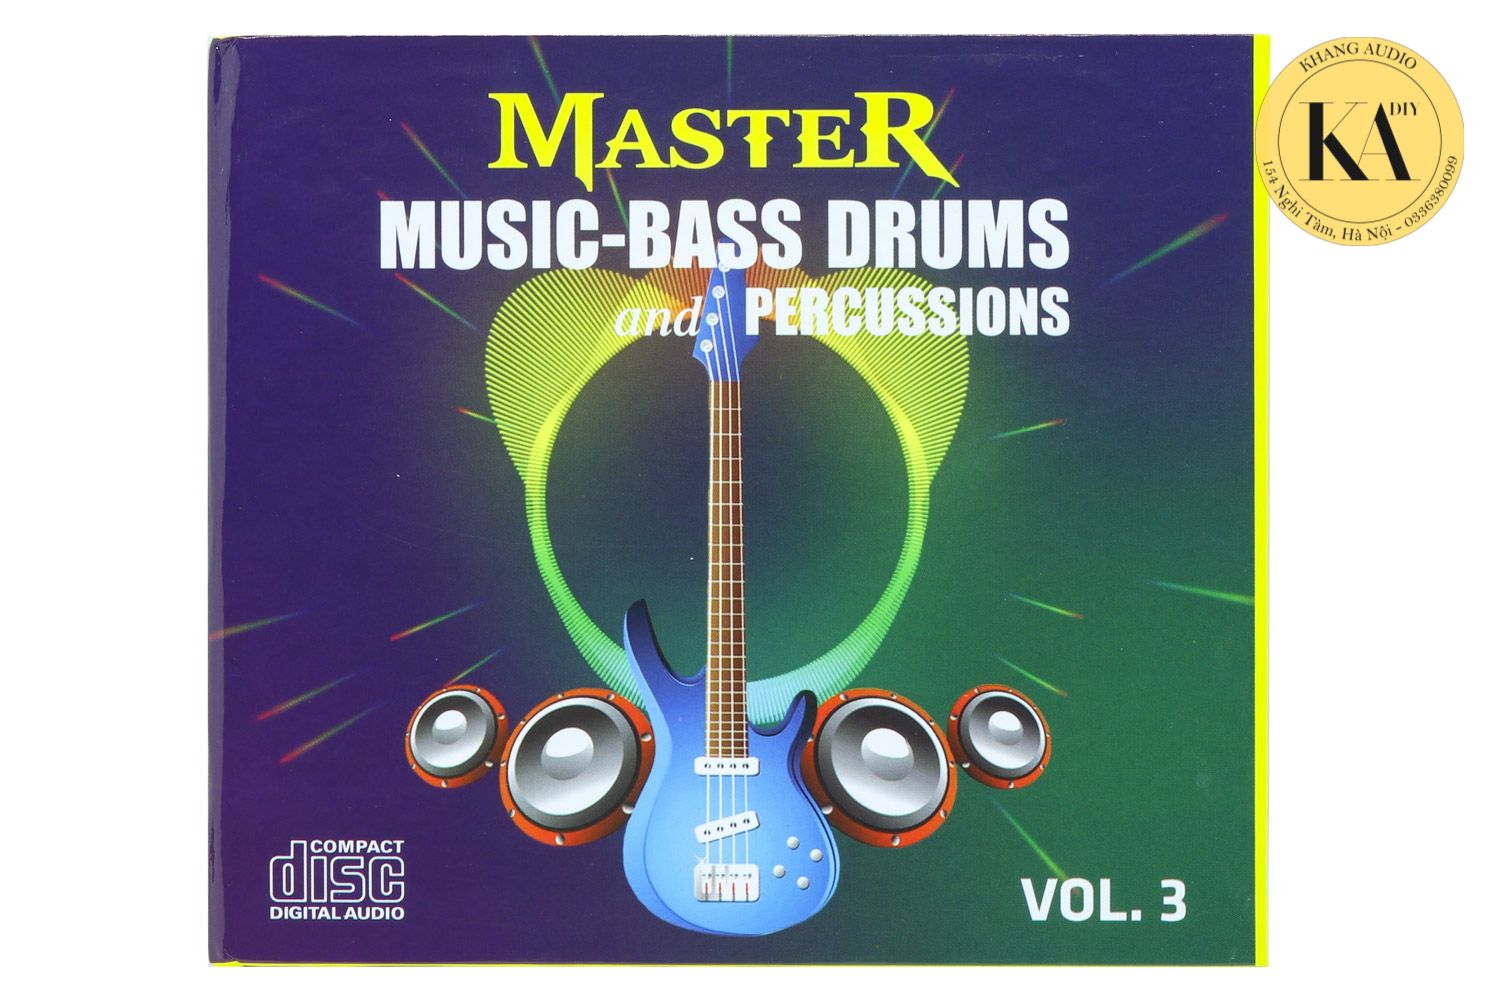 Master Music - Bass Drums and Percussions Vol.3